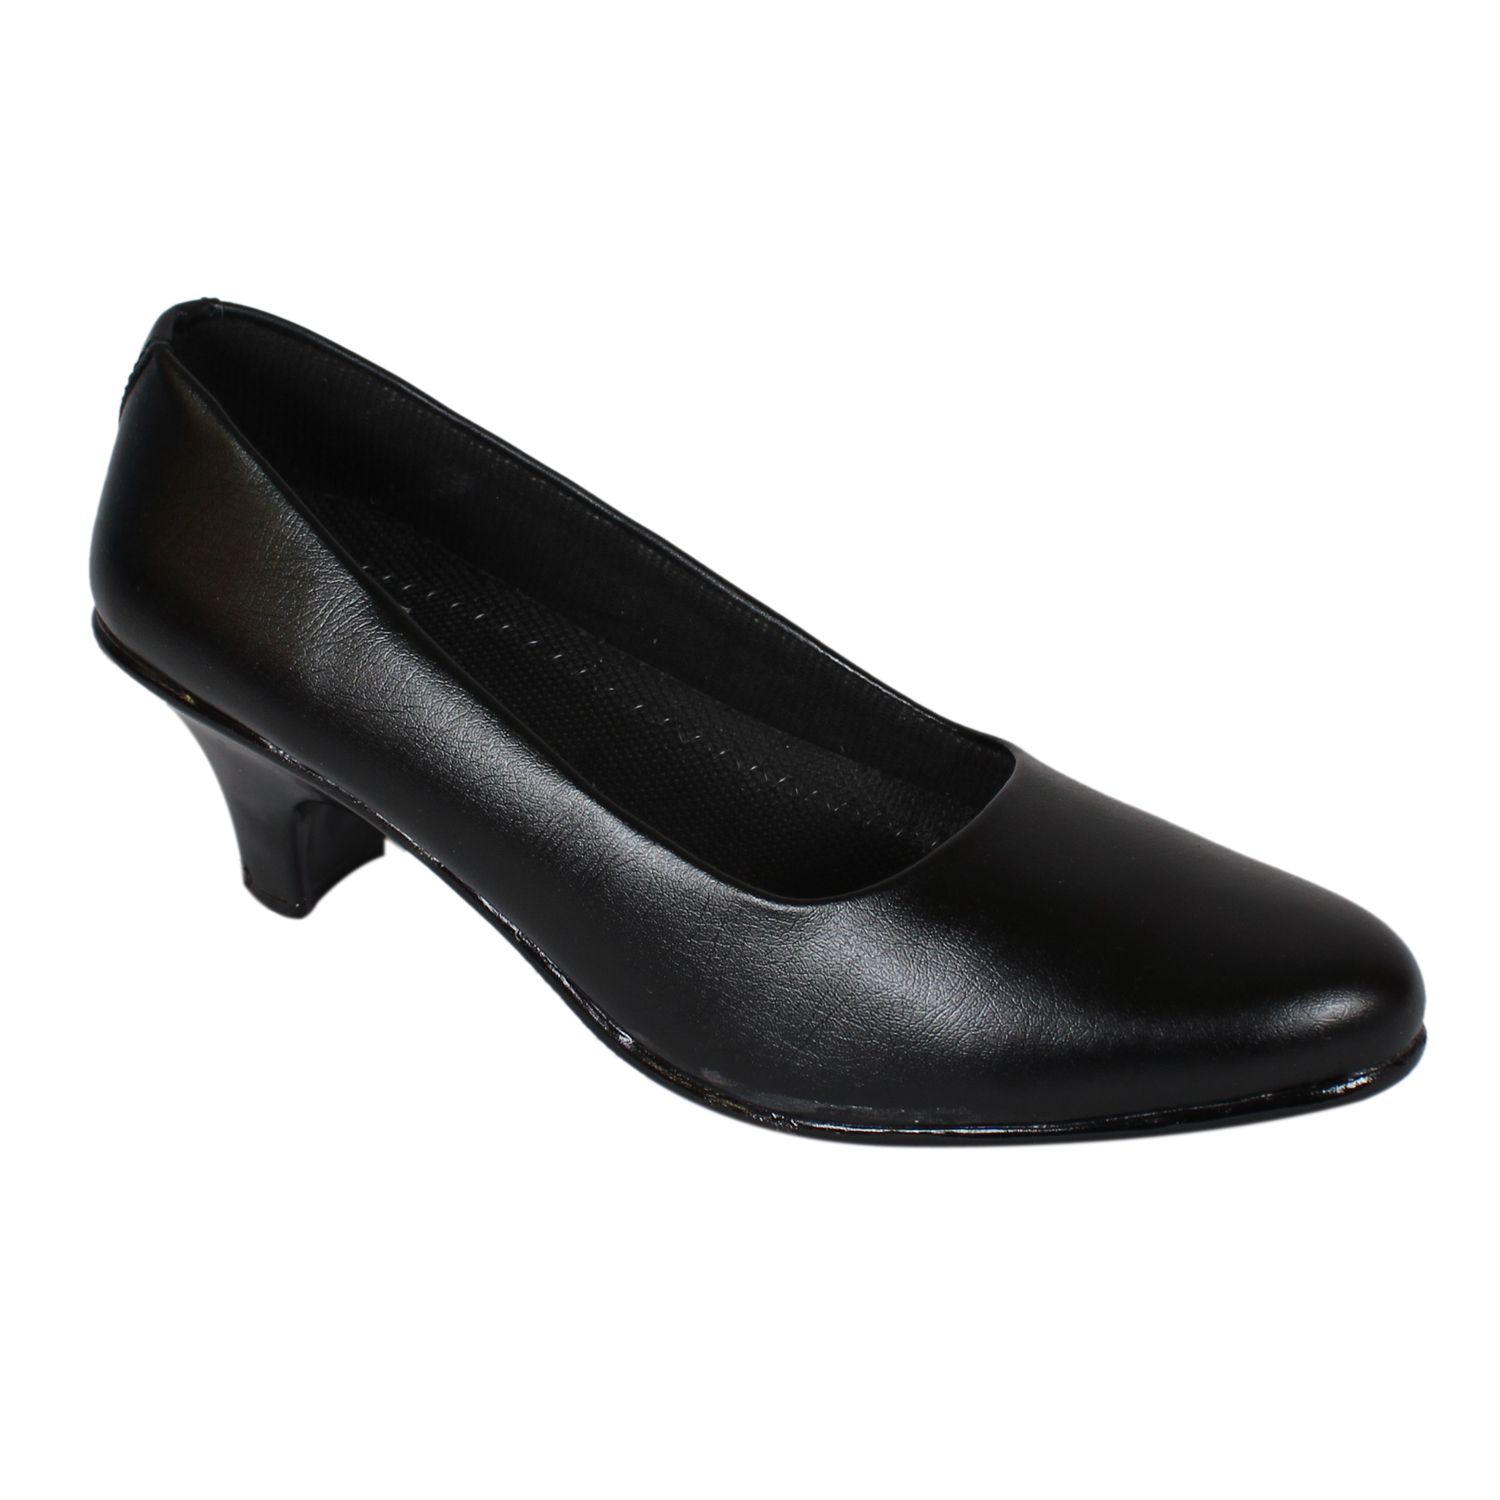     			9space Black Formal Shoes